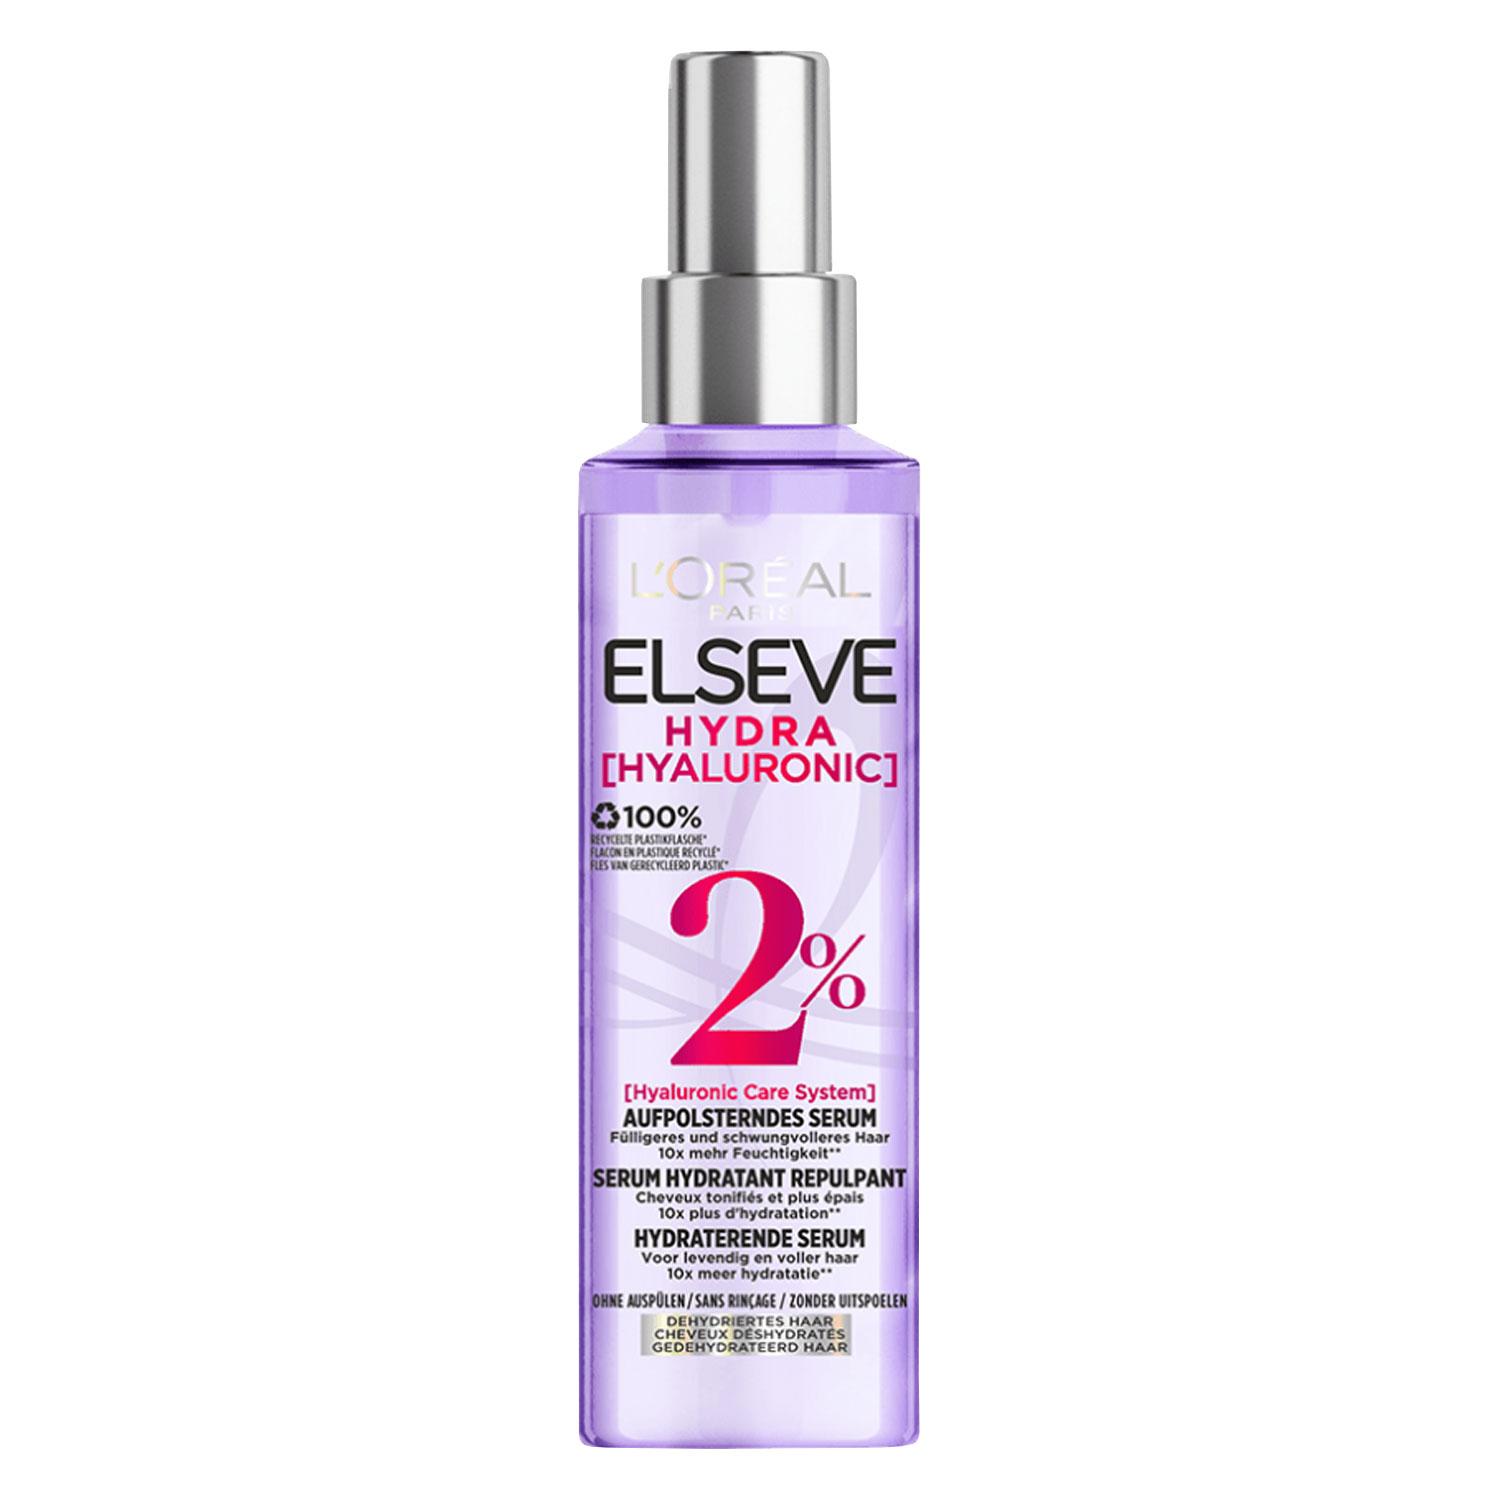 LOréal Elseve Haircare - Hydra Hyaluronic Serum hydratant repulpant 2% Hyaluronic Care System